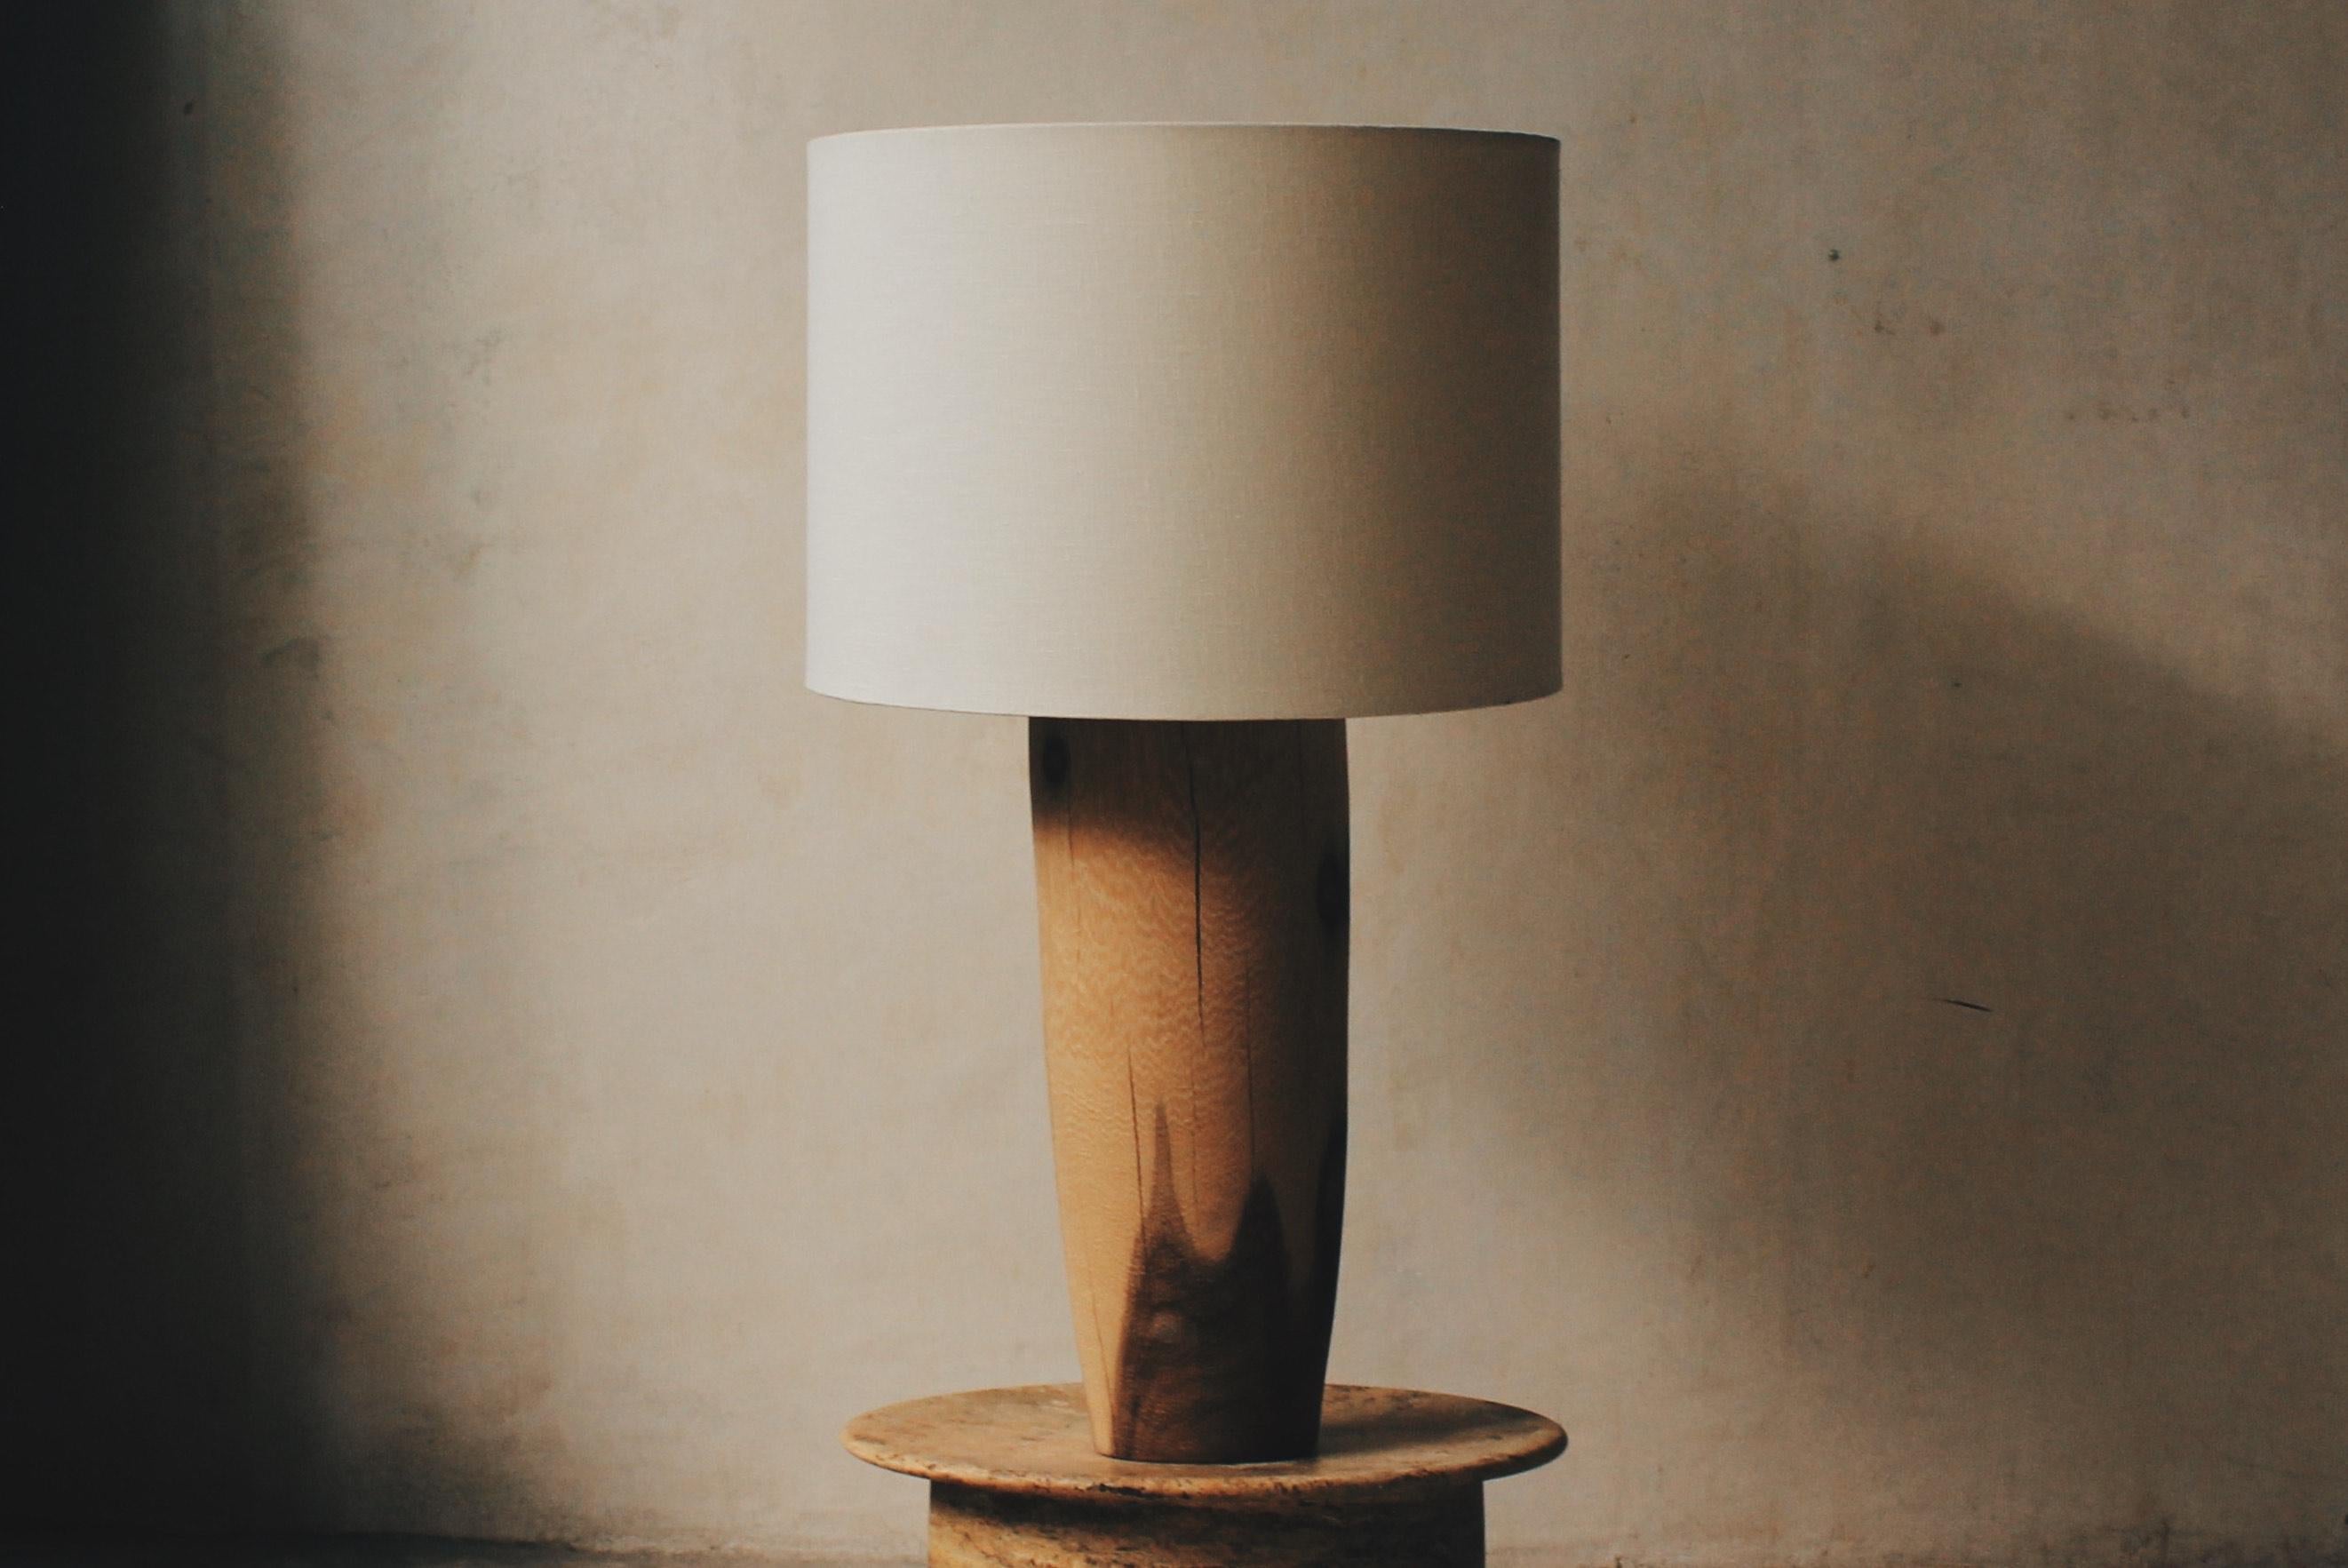 Lamp with Solid Wood Base of Soap and Linen Screen by Daniel Orozco.
Dimensions: D 14 x H 73 cm.
Materials: Wood, Linen.

All our lamps can be wired according to each country. If sold to the USA it will be wired for the USA for